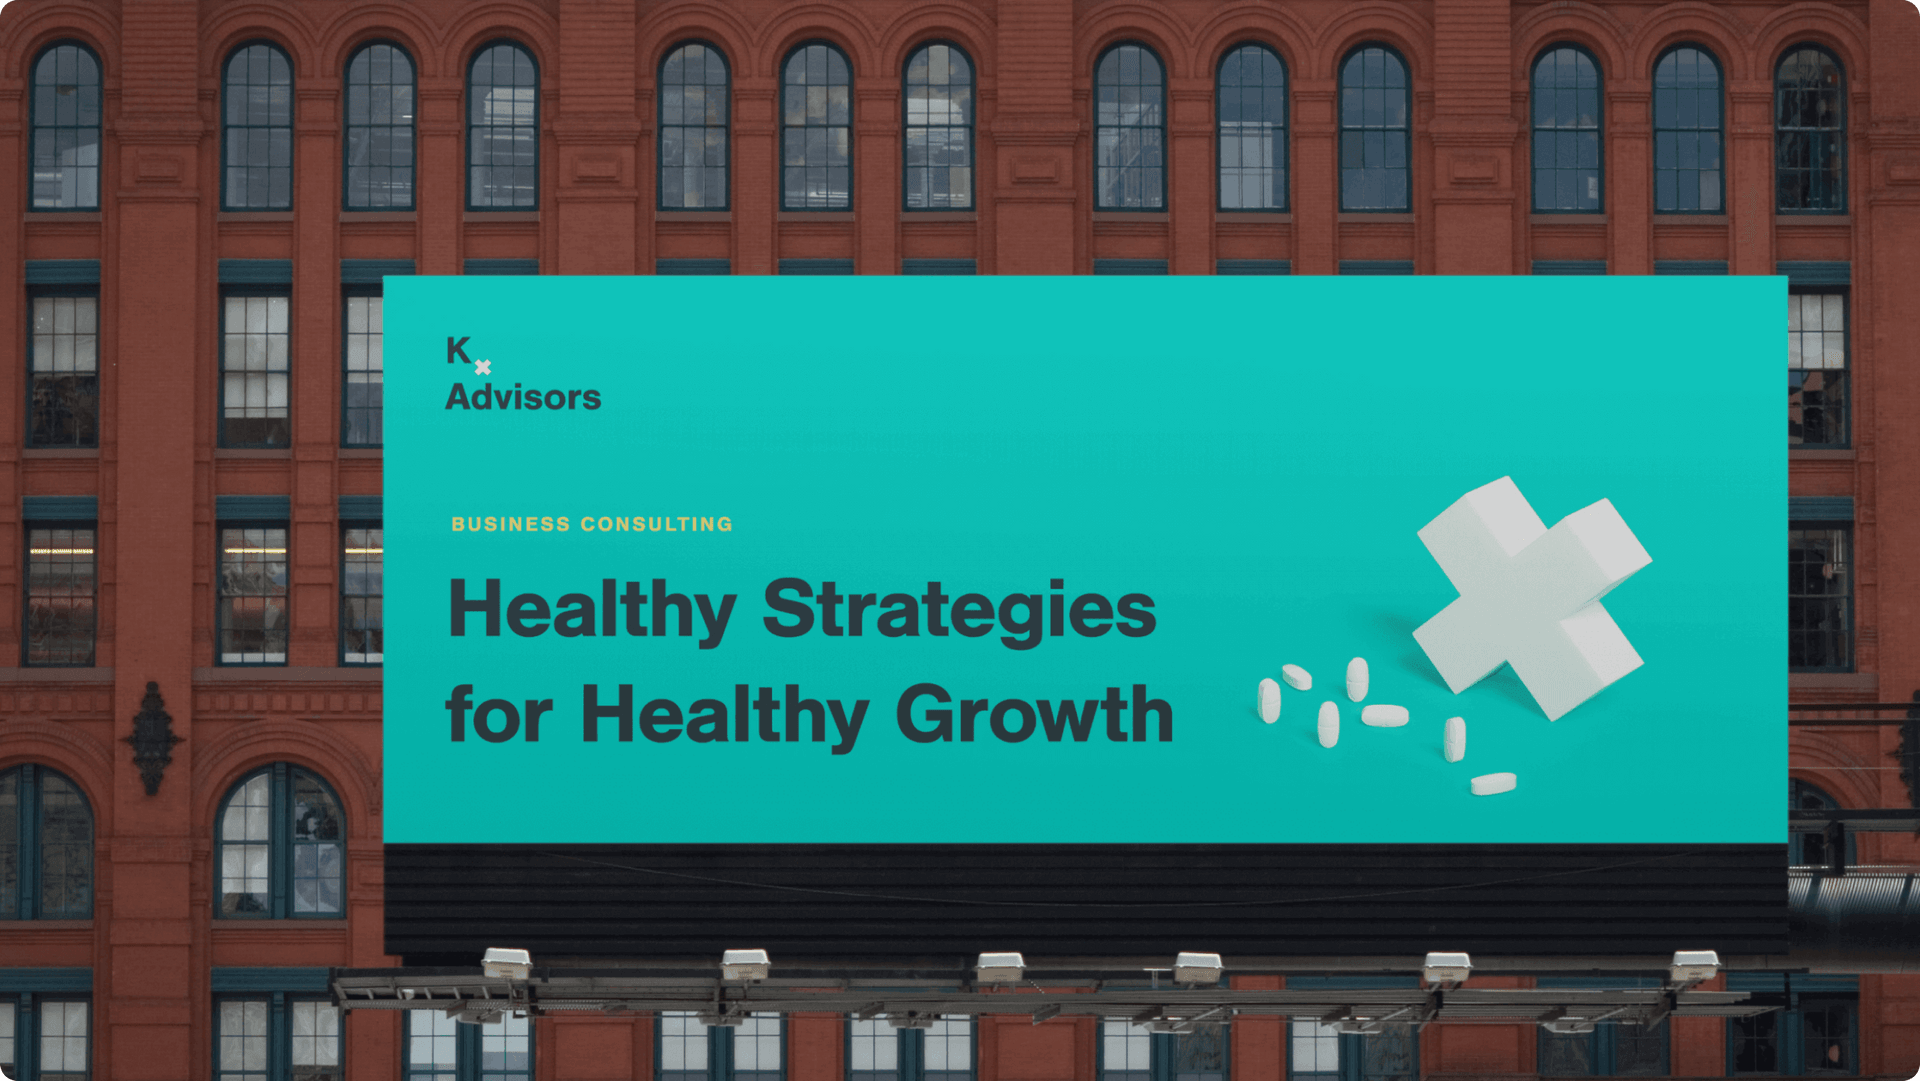 Healthier strategies & growth for healthcare.